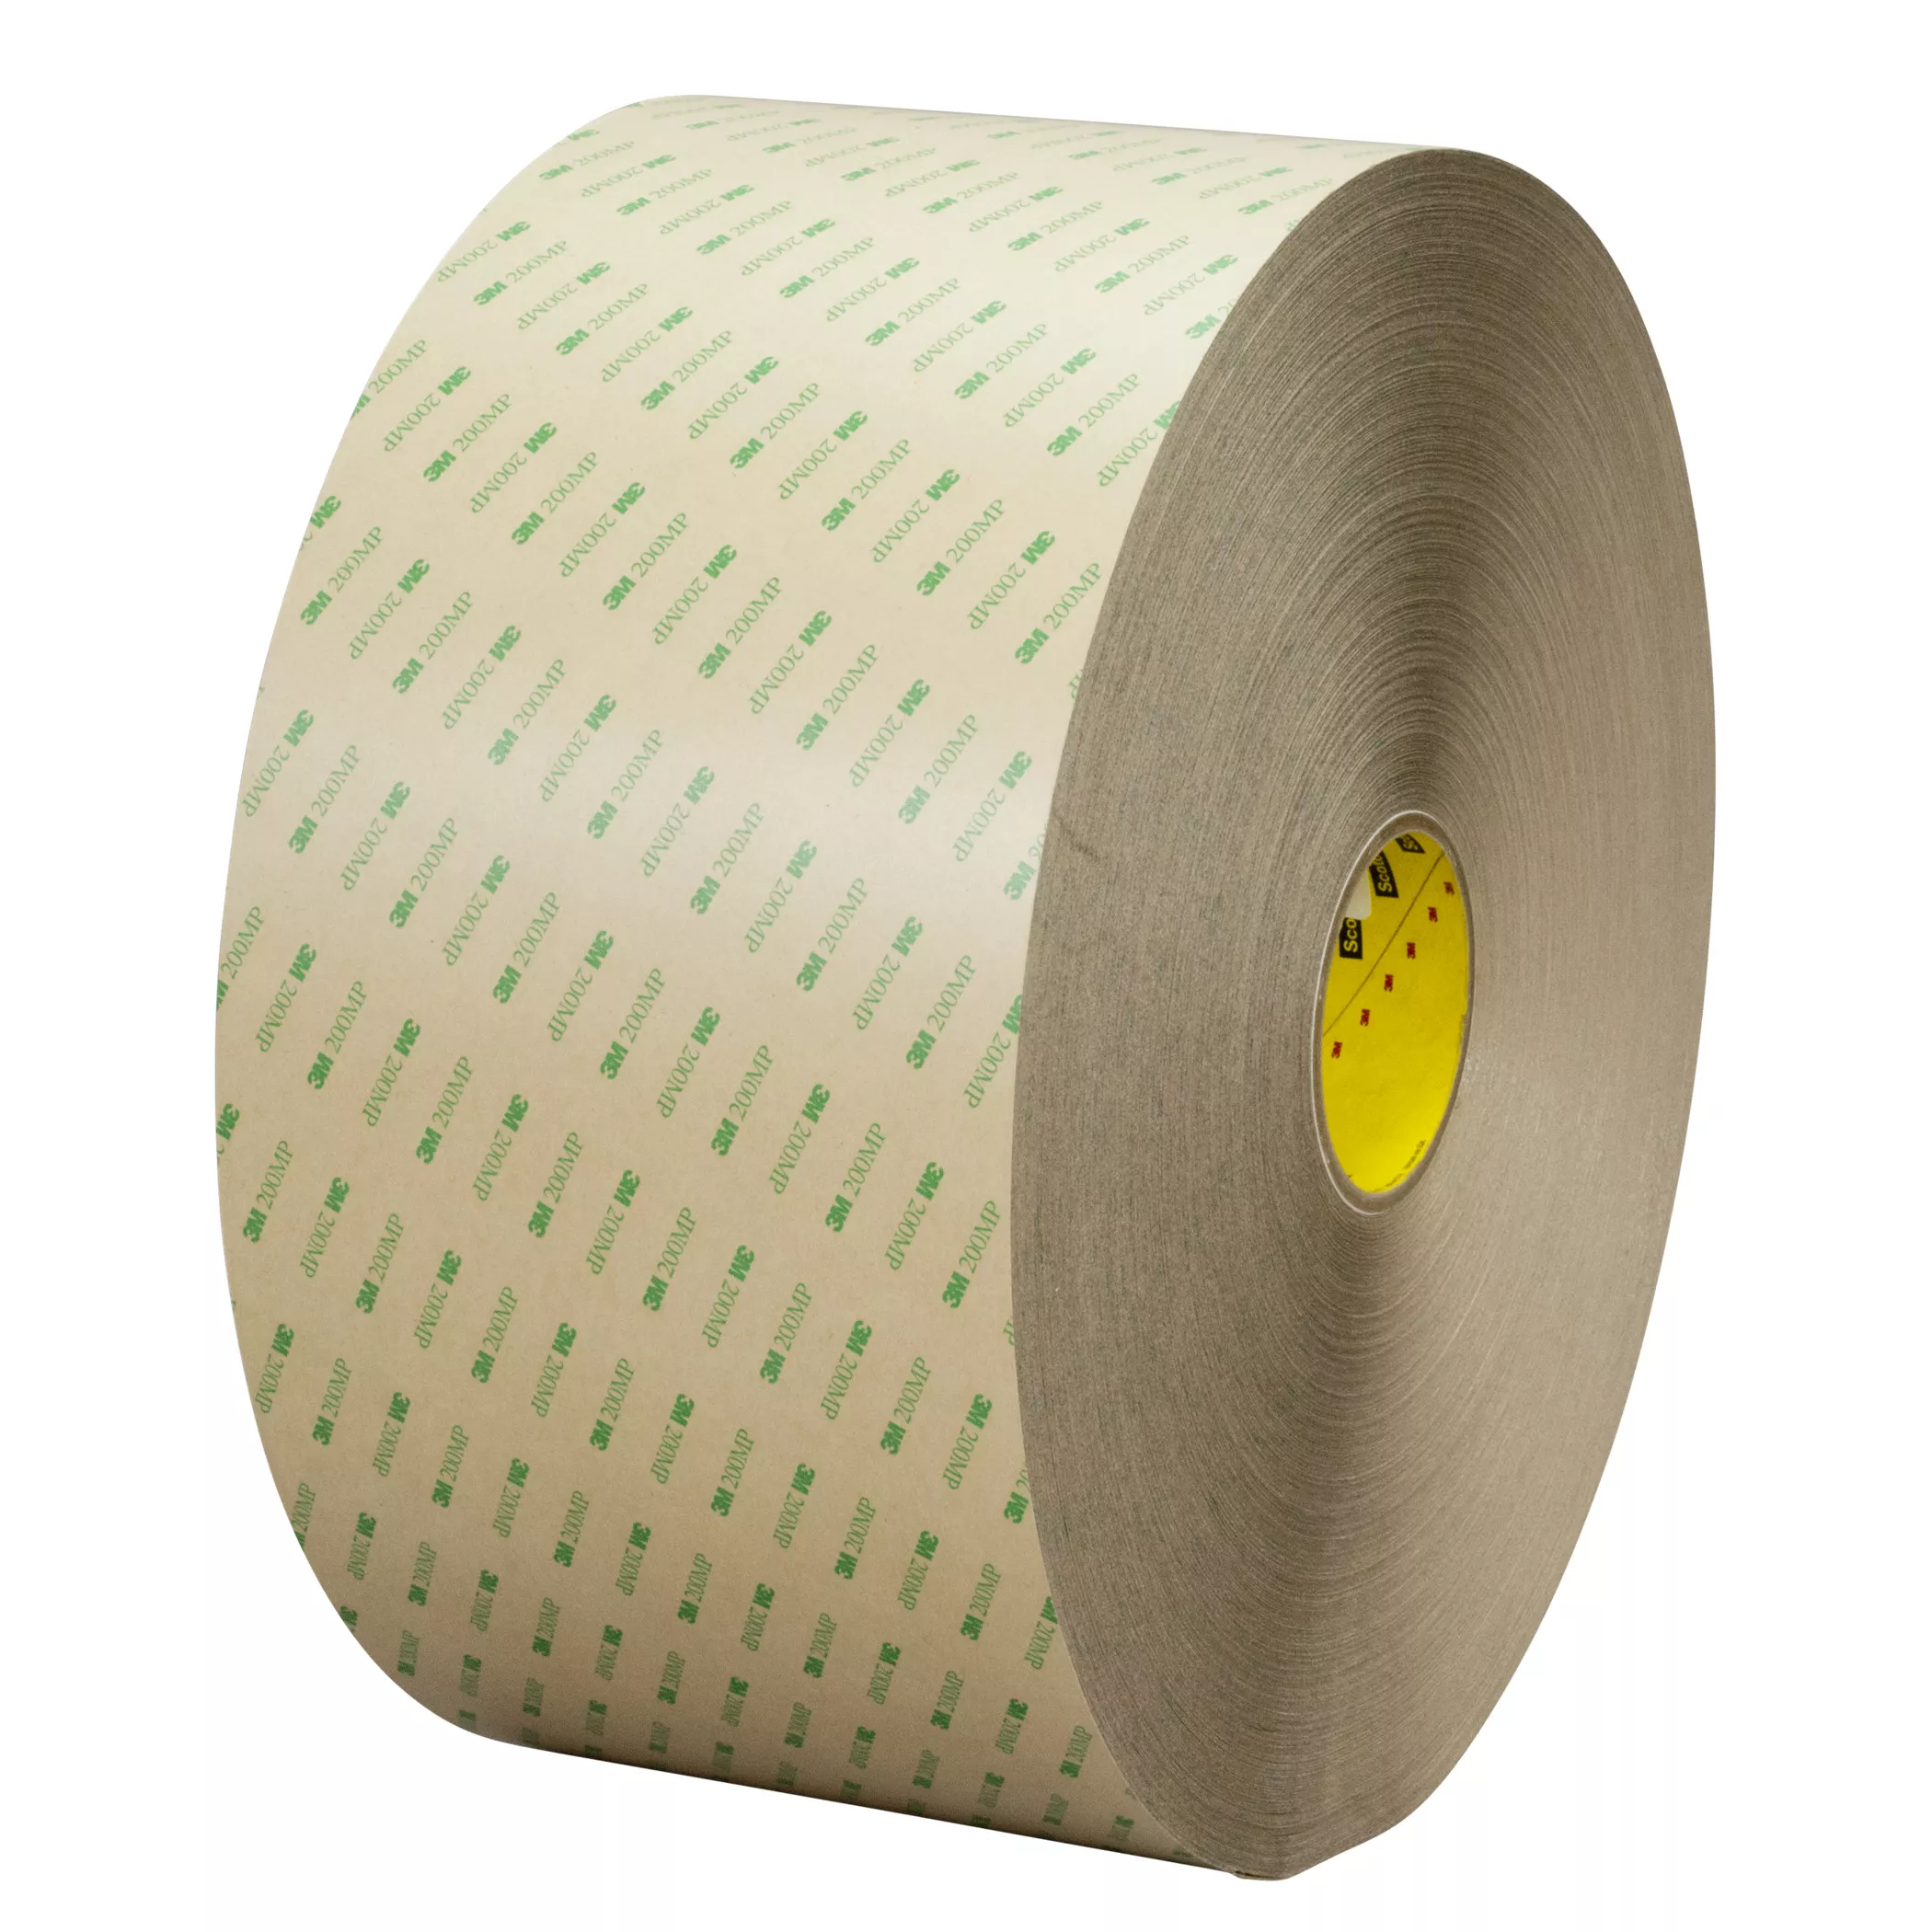 3M™ Adhesive Transfer Tape 966, Clear, 4.5 in x 60 yd, 2.3 mil, 8
Roll/Case